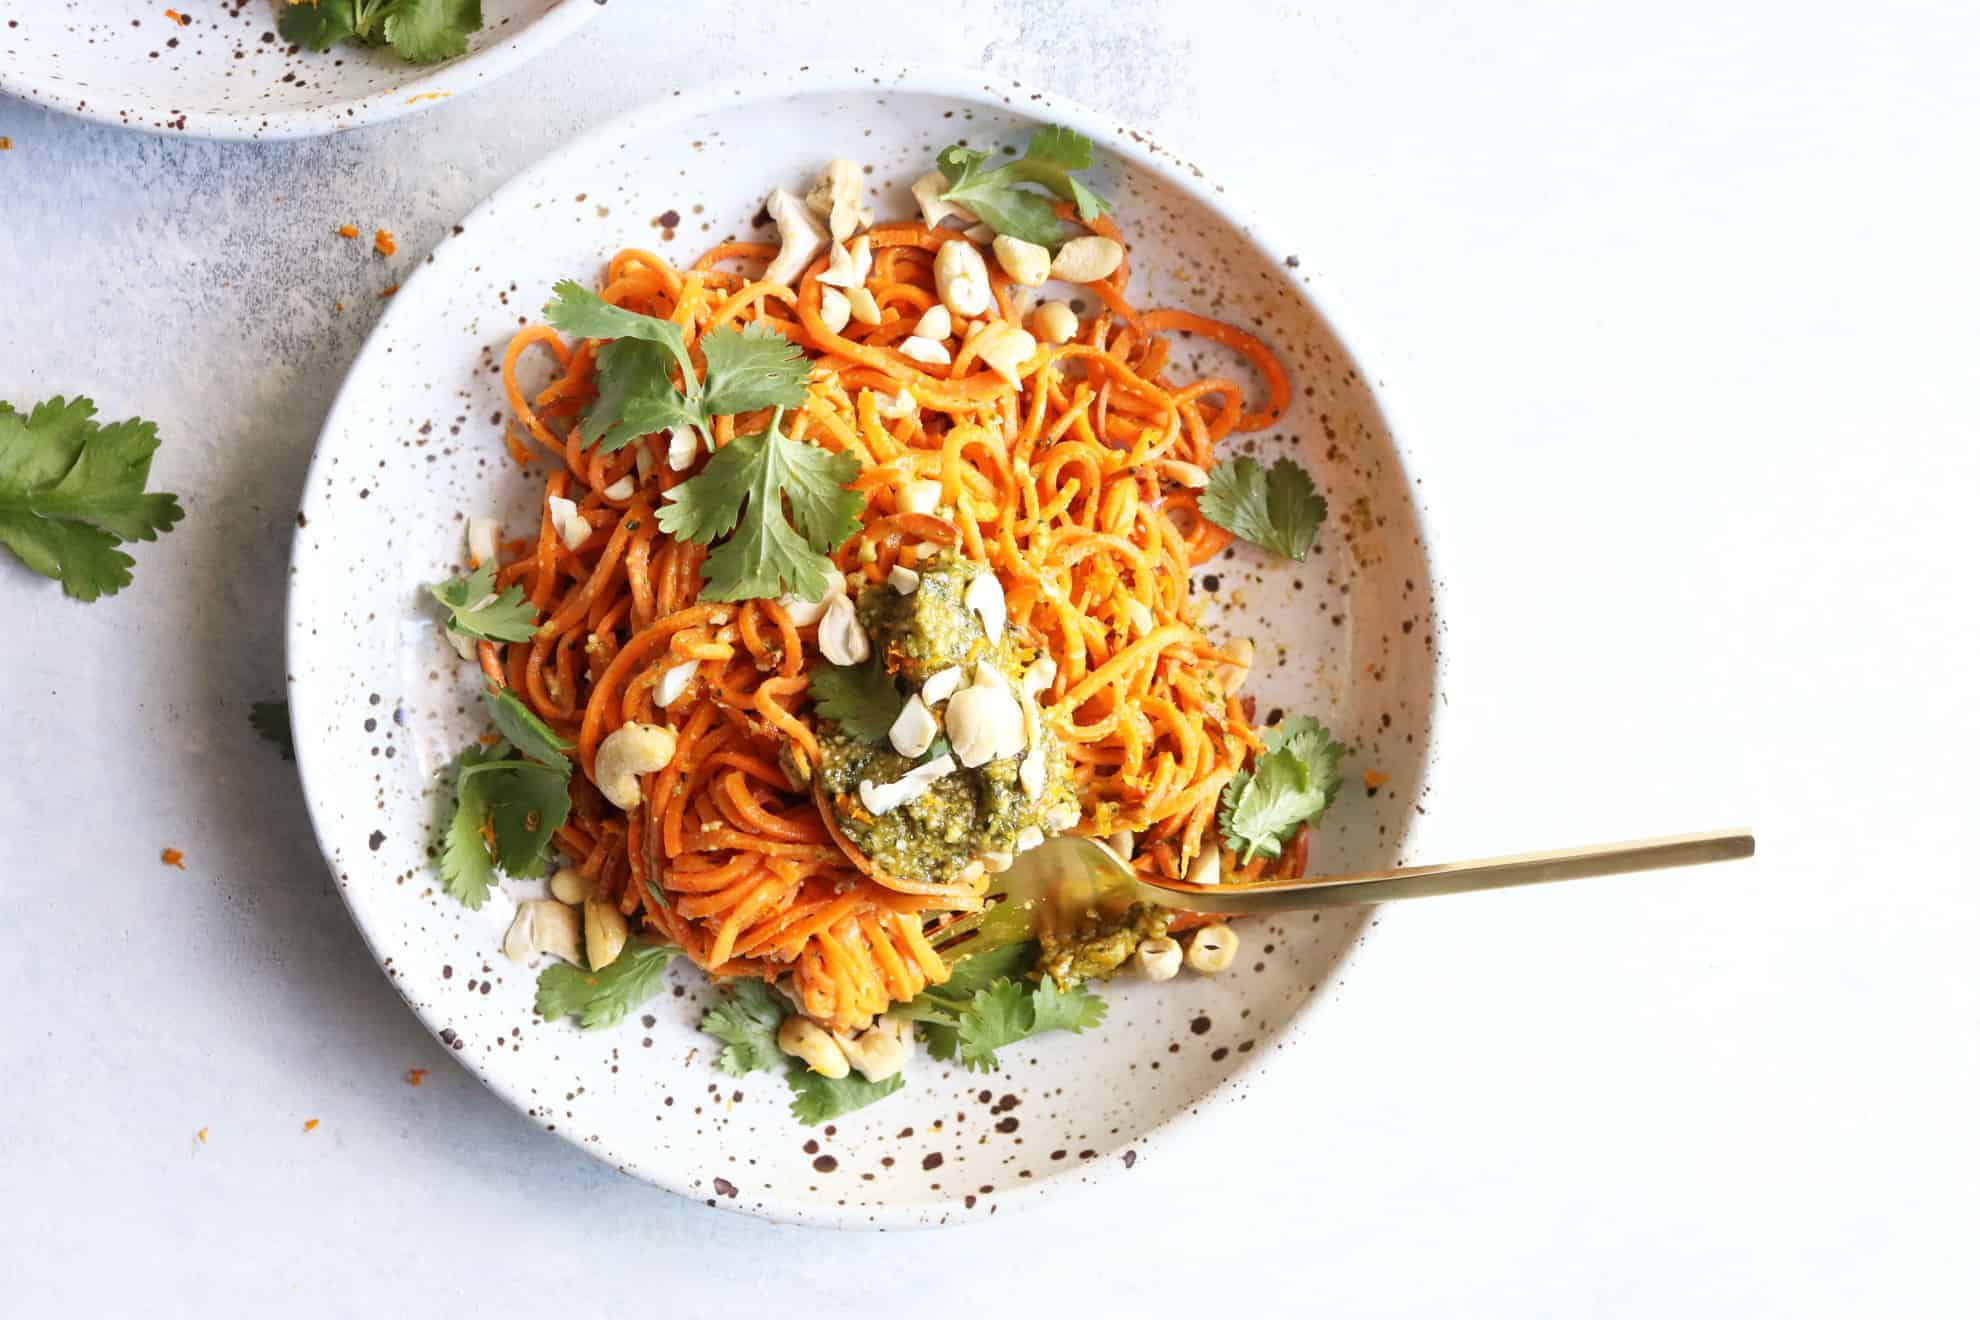 This is an overhead image of a speckled bowl with sweet potato noodles, pesto, cilantro, and cashews. The bowl sits on a white surface and another bowl to the top left of the image. A gold fork is in the bowl twirling the noodles.